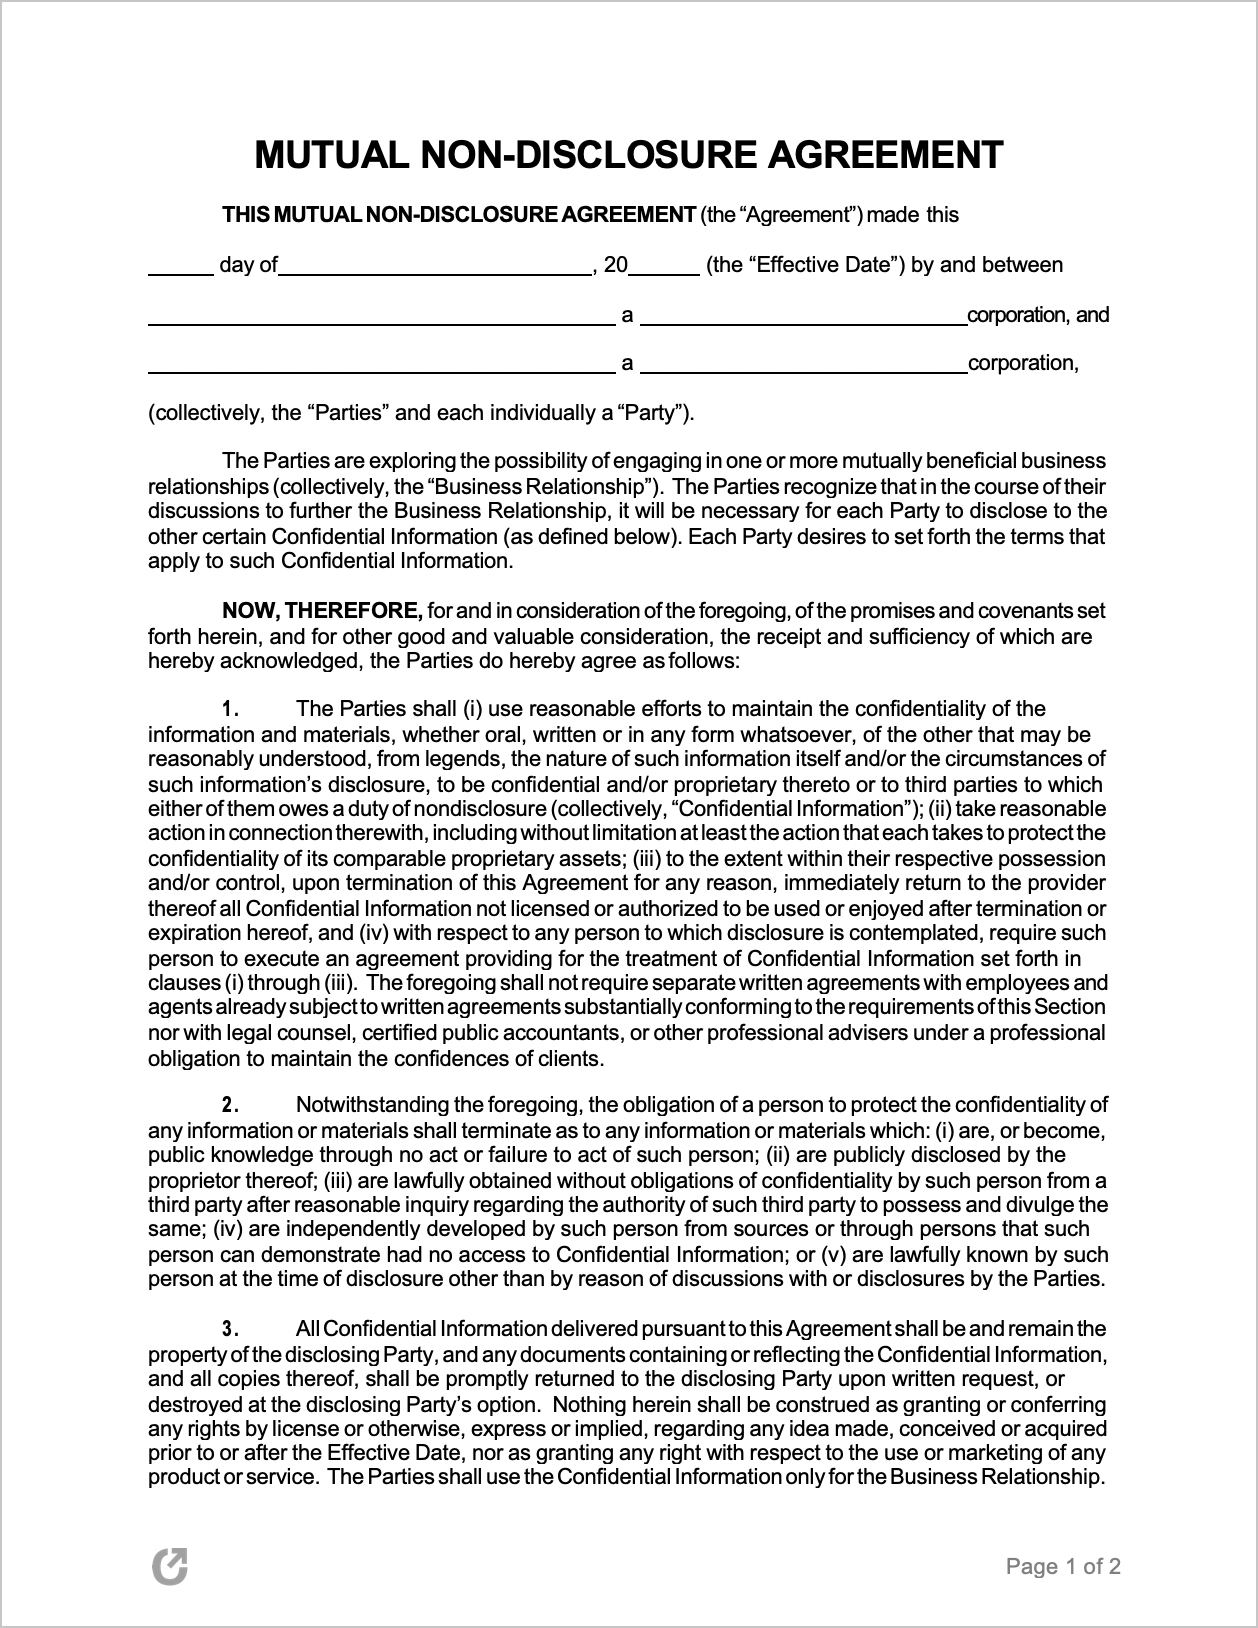 Free Mutual Non-Disclosure Agreement Template  PDF  WORD  RTF Intended For free mutual non disclosure agreement template